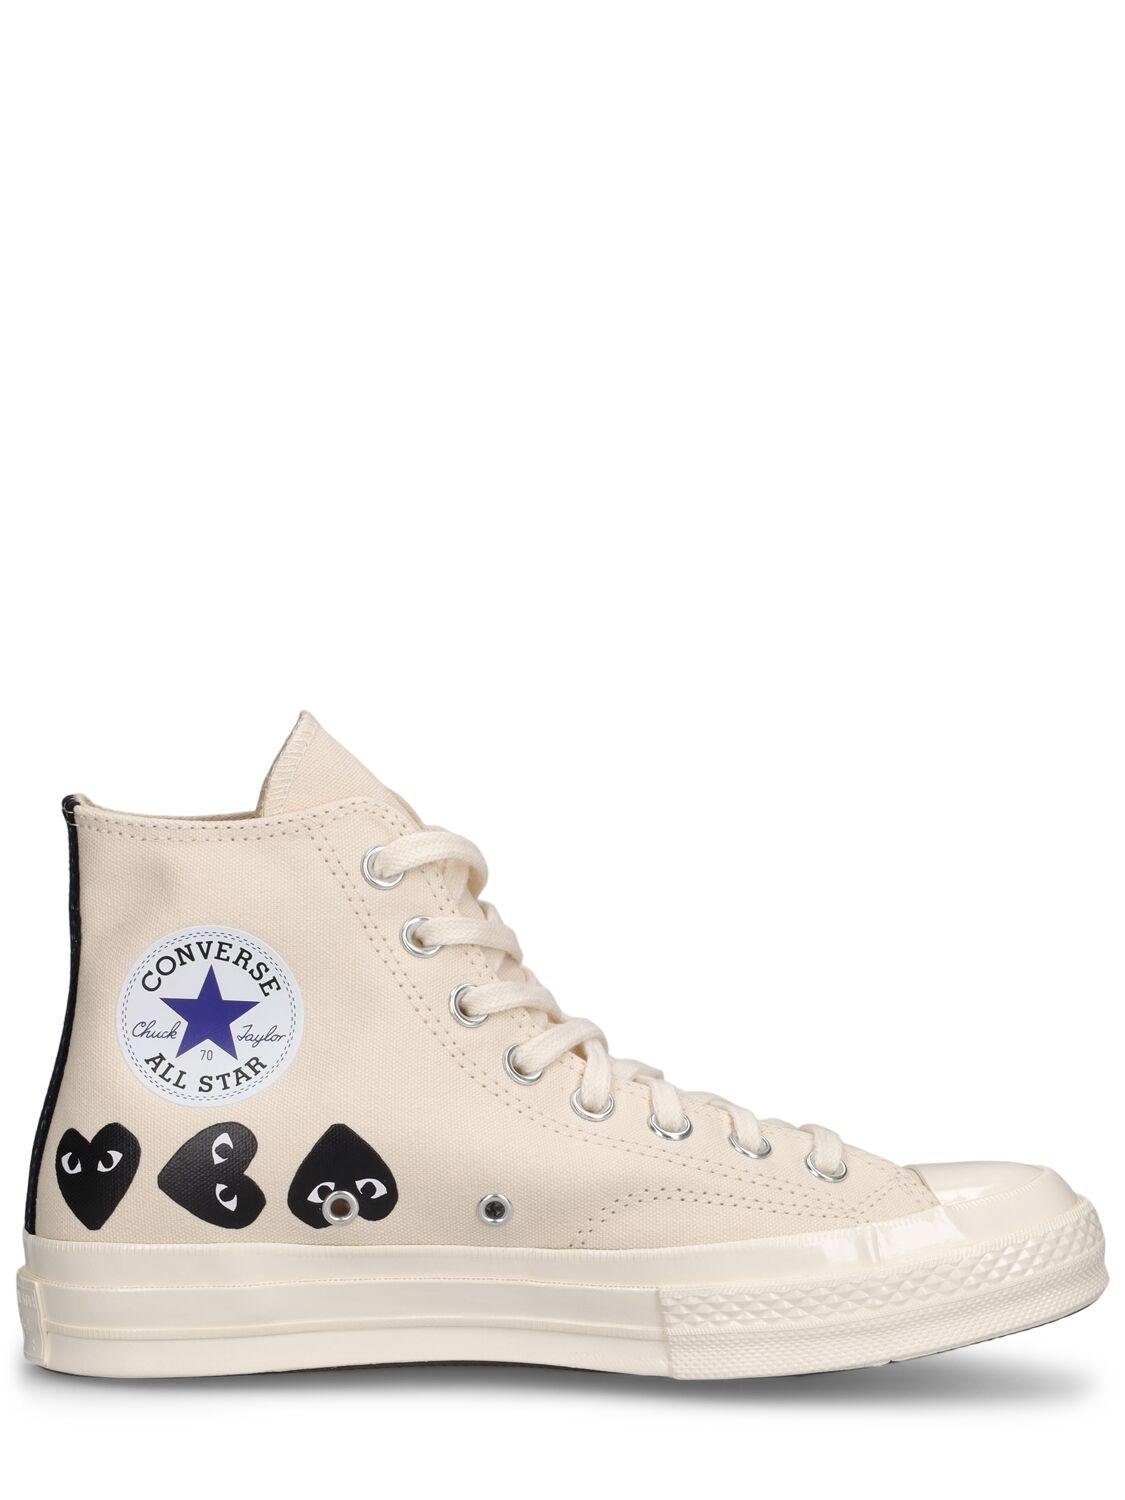 Converse Canvas High Top Sneakers by COMME DES GARCONS